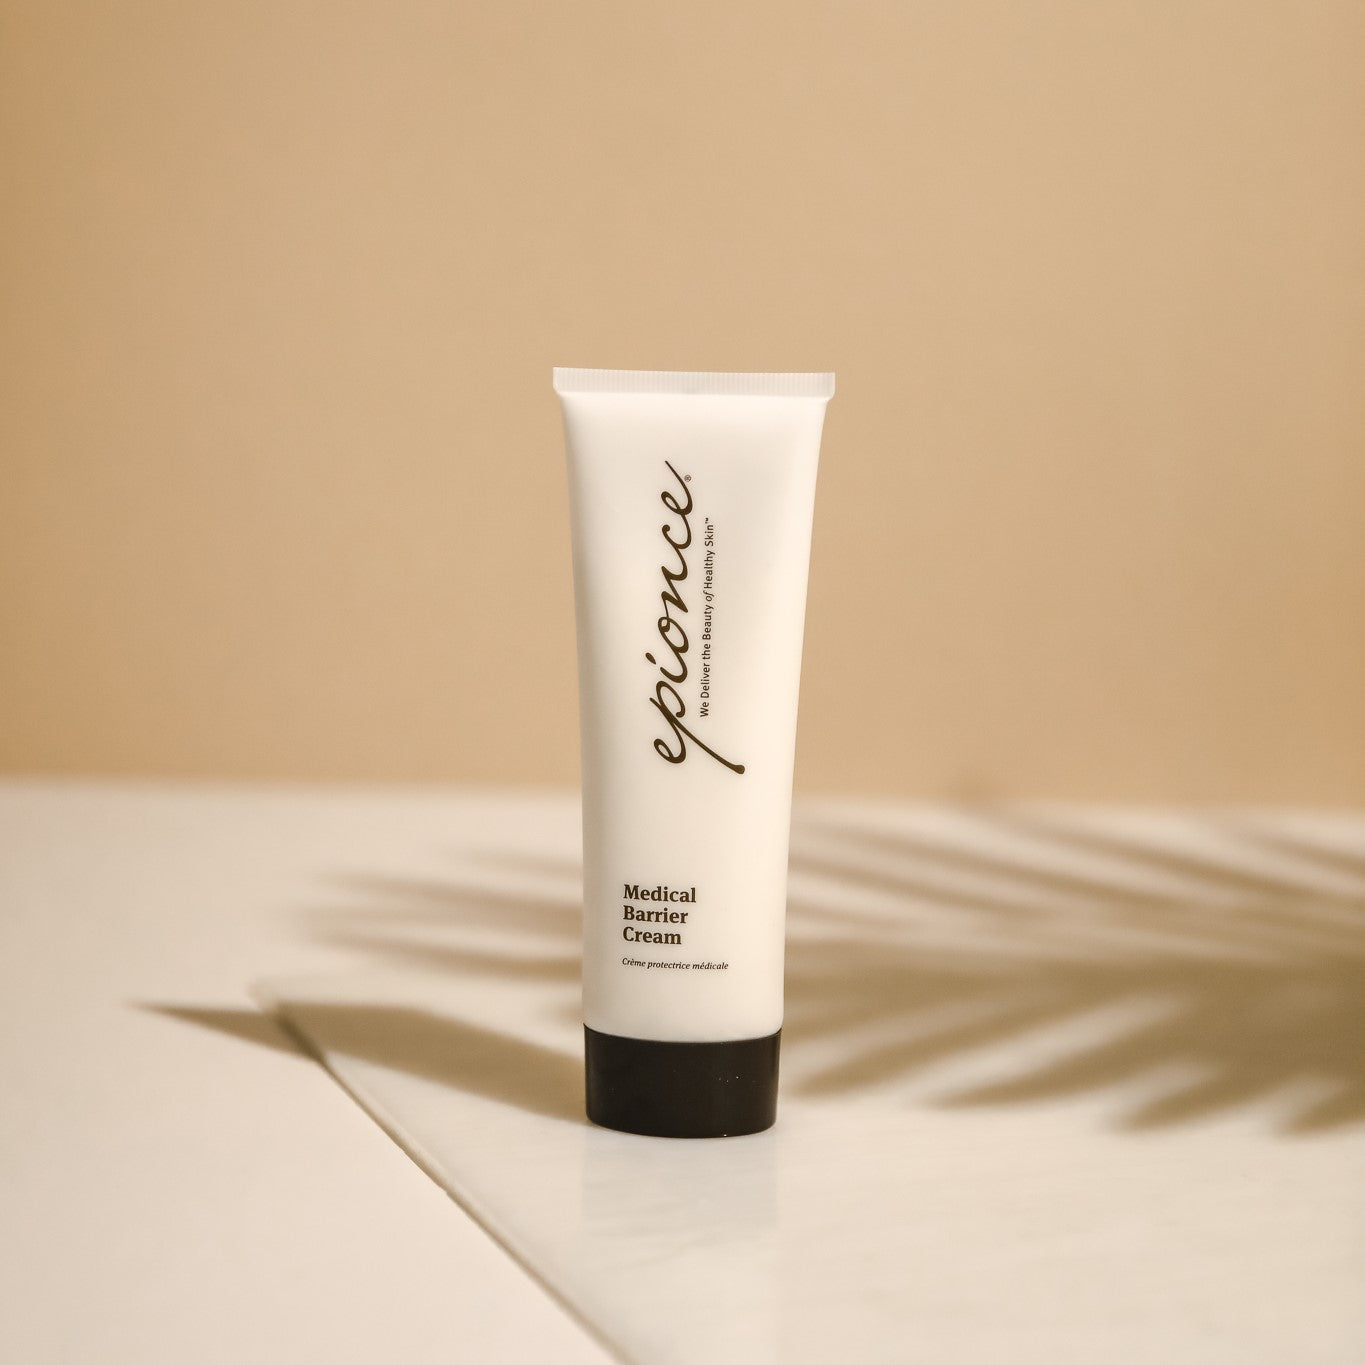 Gain a surge of hydration from the Medical Barrier Cream from Epionce